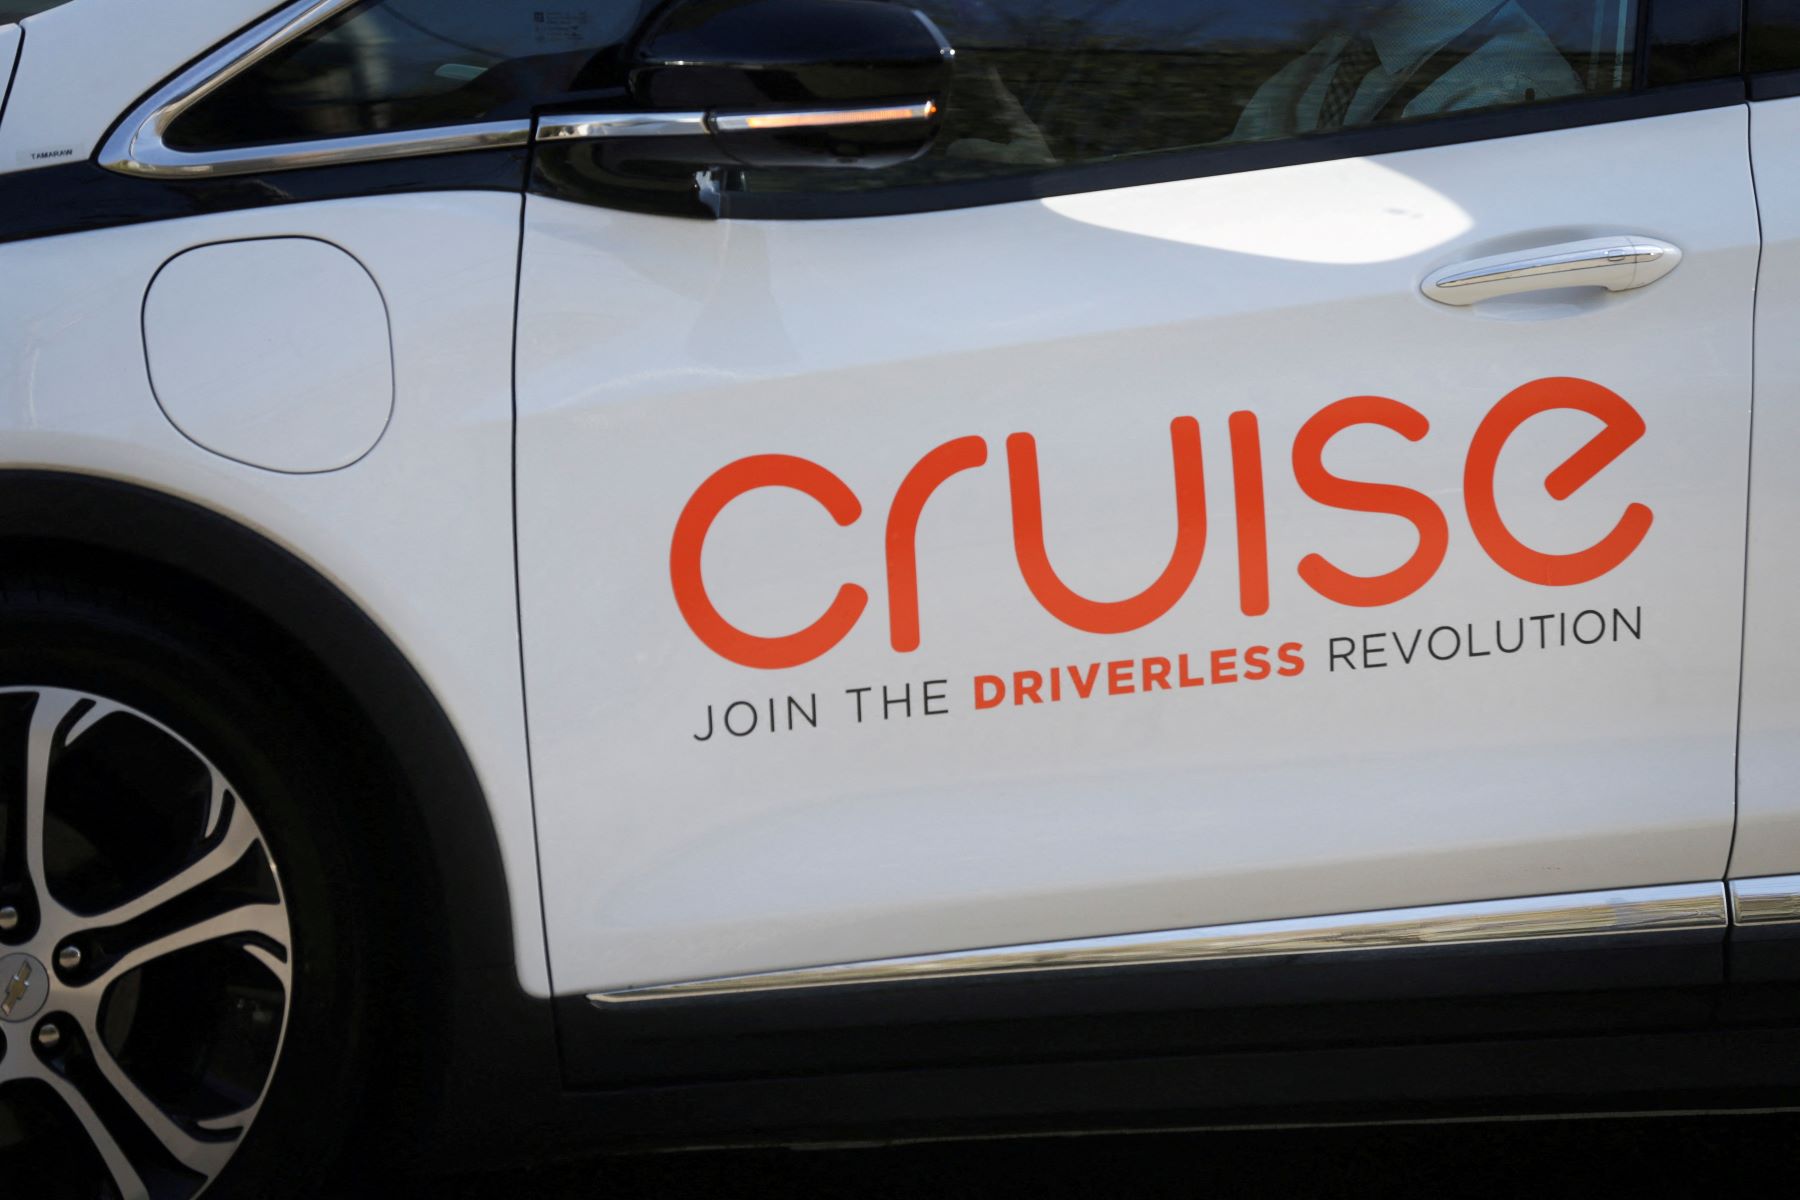 Cruise Unveils Wheelchair-Accessible Robotaxi For Testing Starting Next Month